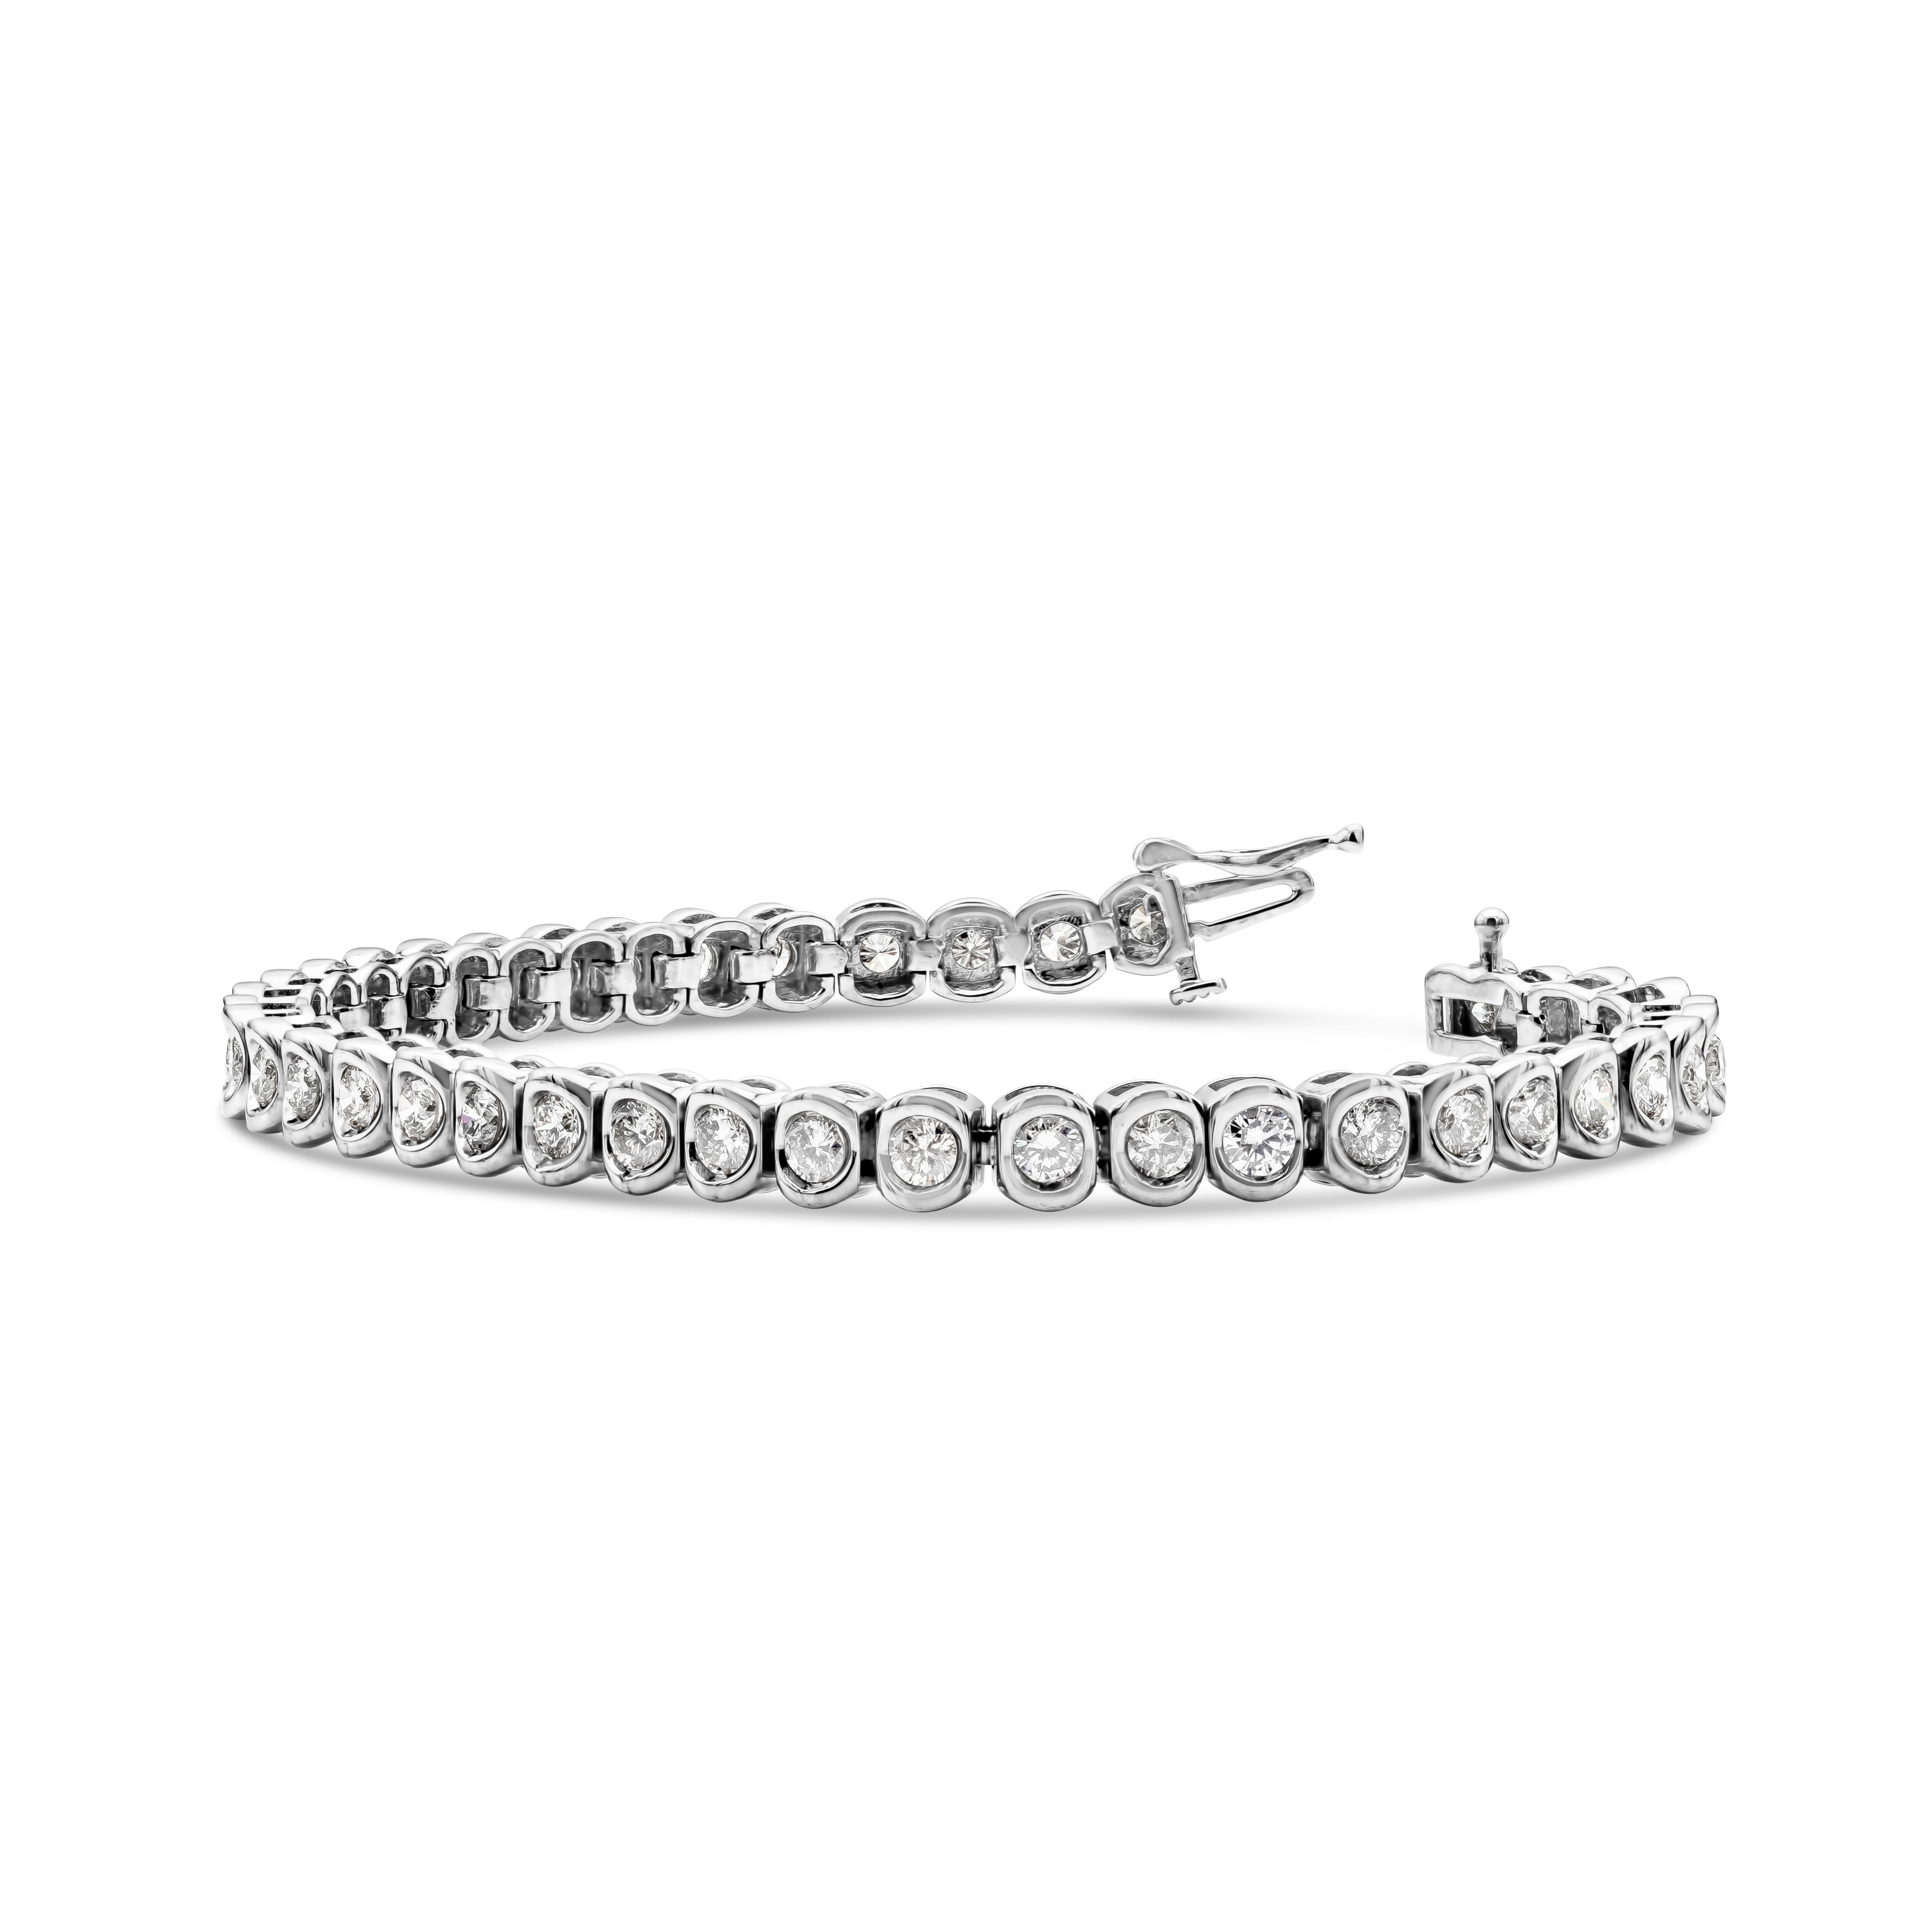 This beautiful bracelet showcases a row of 41 round brilliant diamonds mounted in 14K White Gold bezel setting. Diamond weighs 4.25 carats total, F-G color and S12-I1 in clarity.
